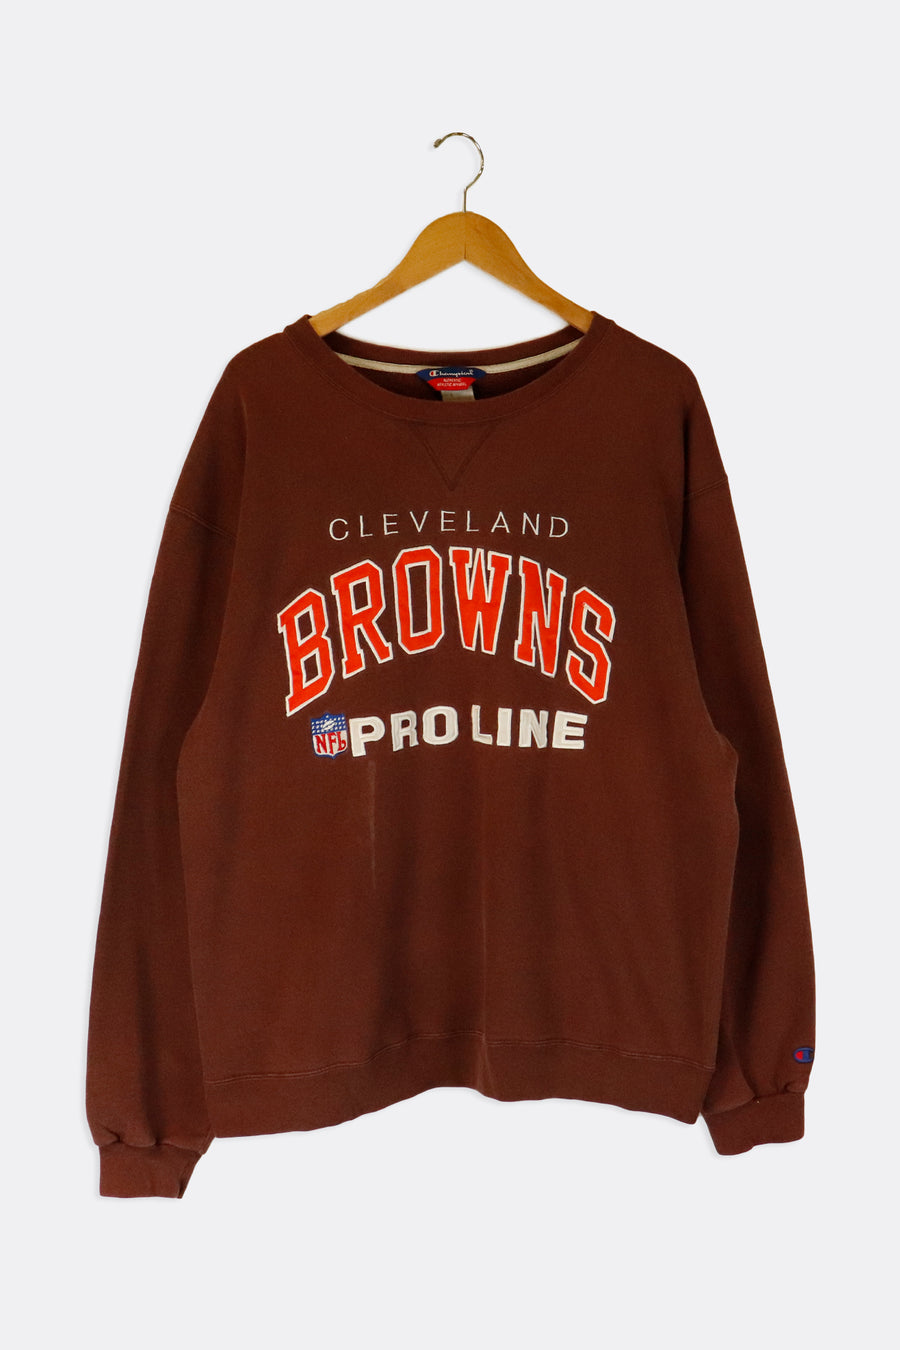 Vintage Champion NFL Cleveland Browns Pro Line Embroided Puffy Sweatshirt